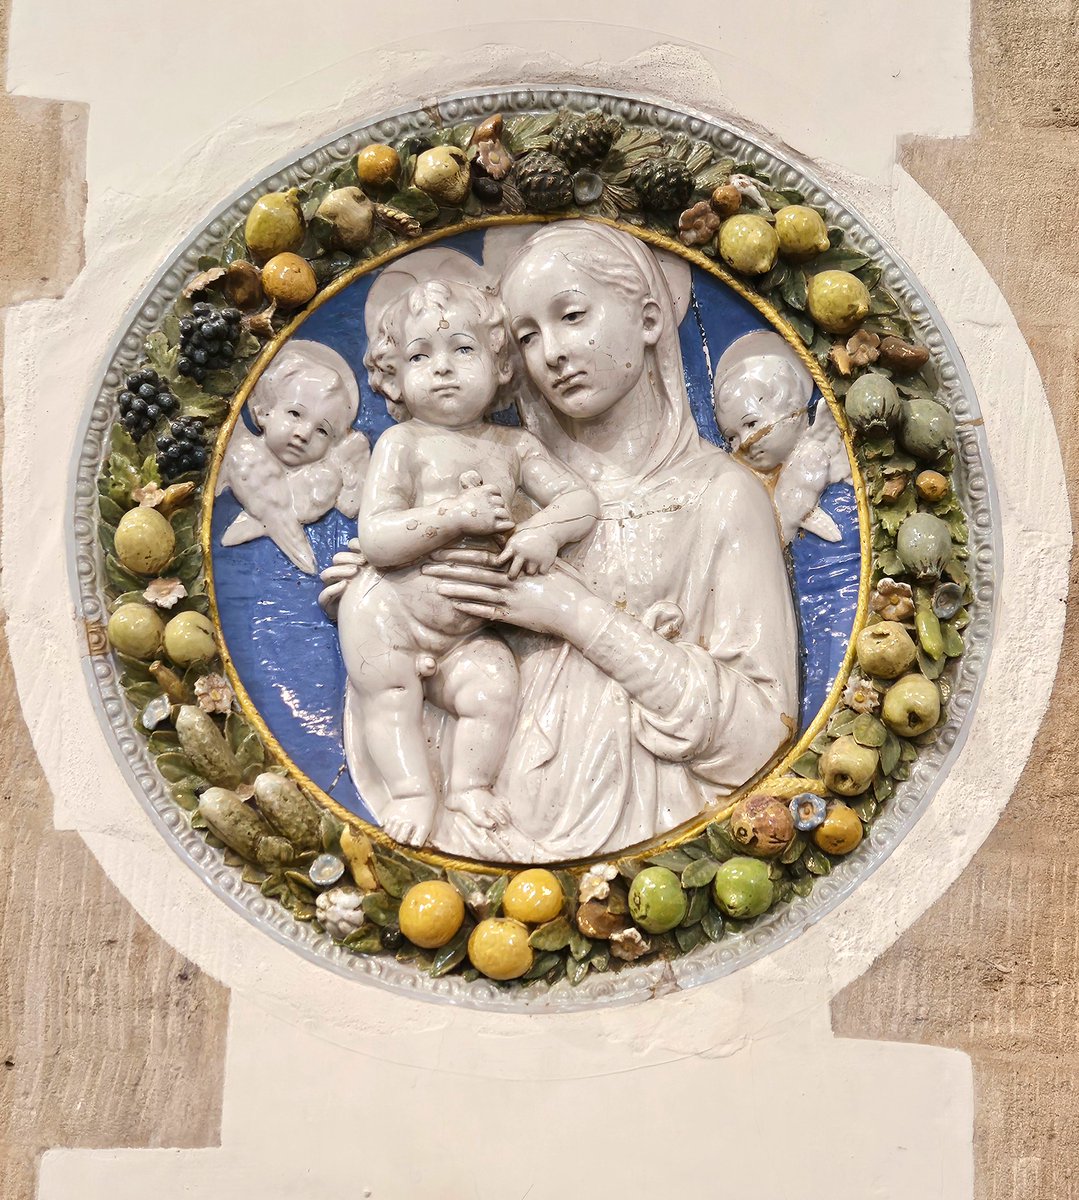 The Blessed Virgin and Christchild by Andrea della Robbia, c1500, in Portsmouth Anglican Cathedral. It was the gift of the architect Sir Charles Nicholson, who drew up the 1935 plan for the expansion of the Cathedral. @PortsmouthCath